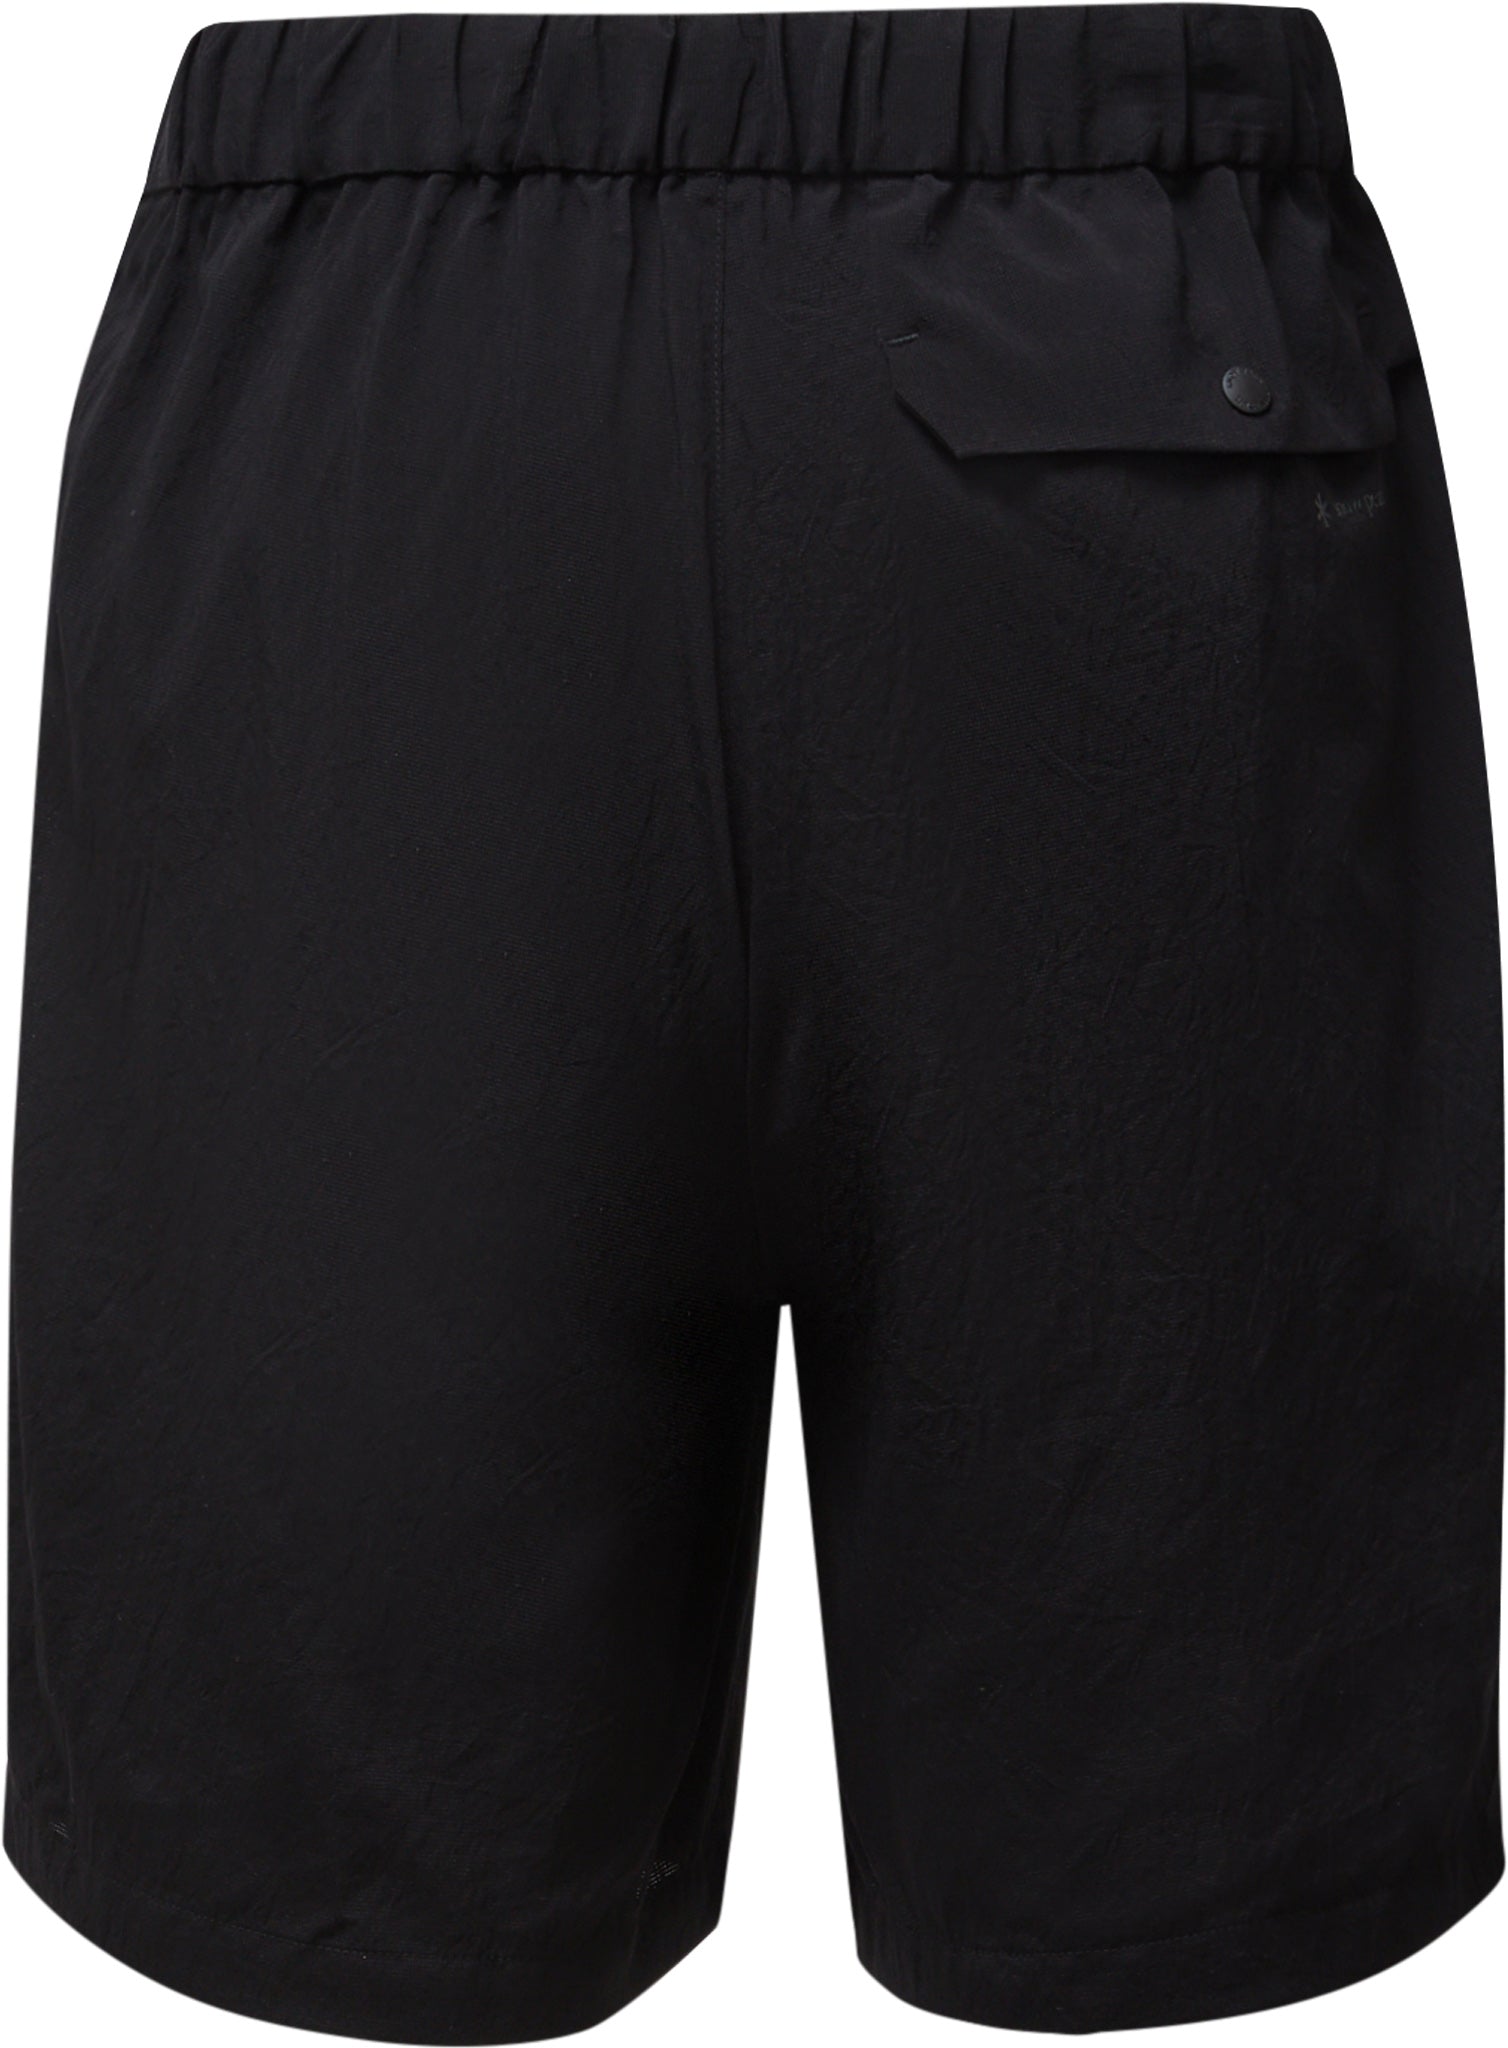 Quick Dry Solid Sweatpant Shorts